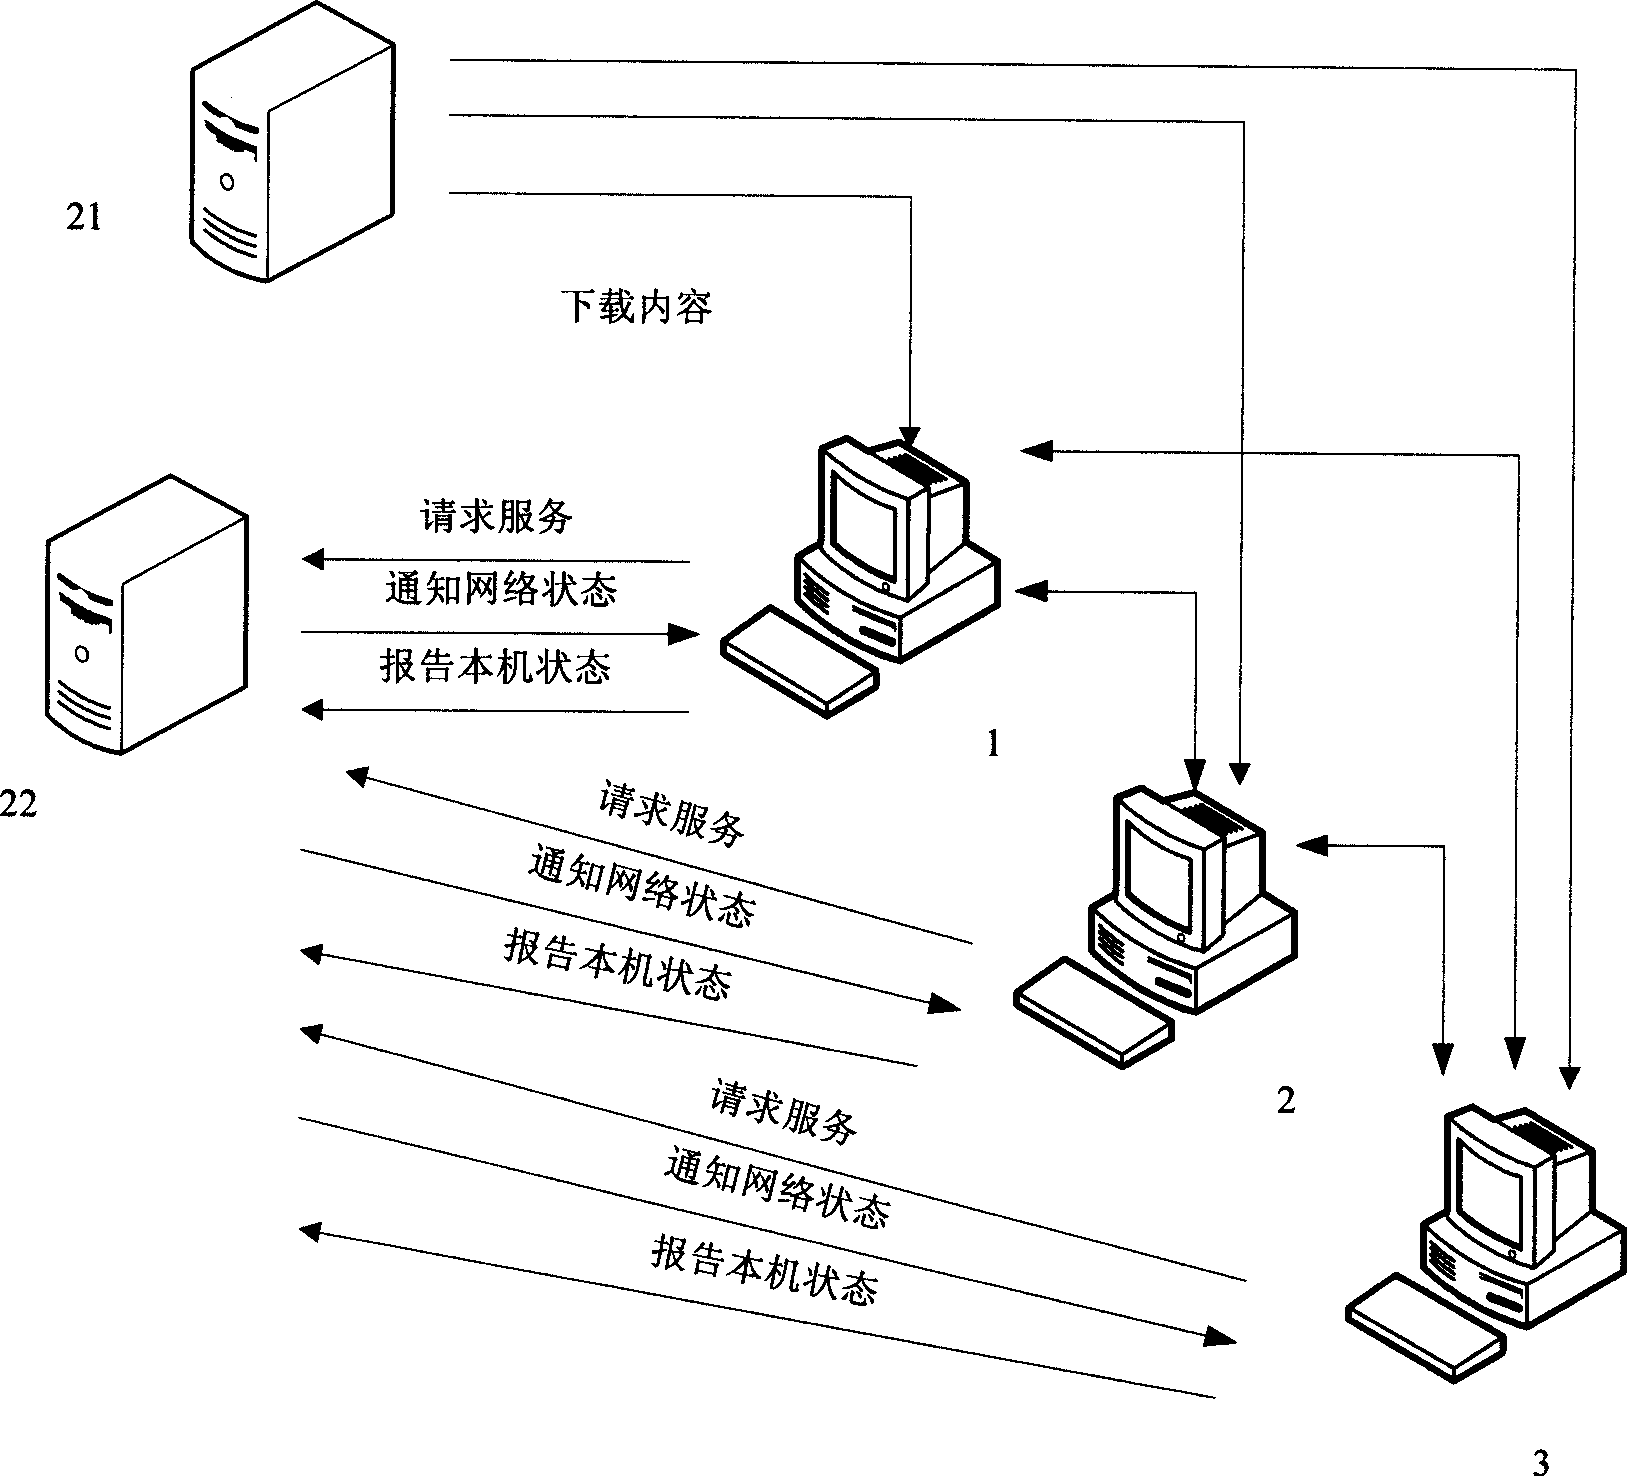 Network set-top box and method for network downloading, file publishing